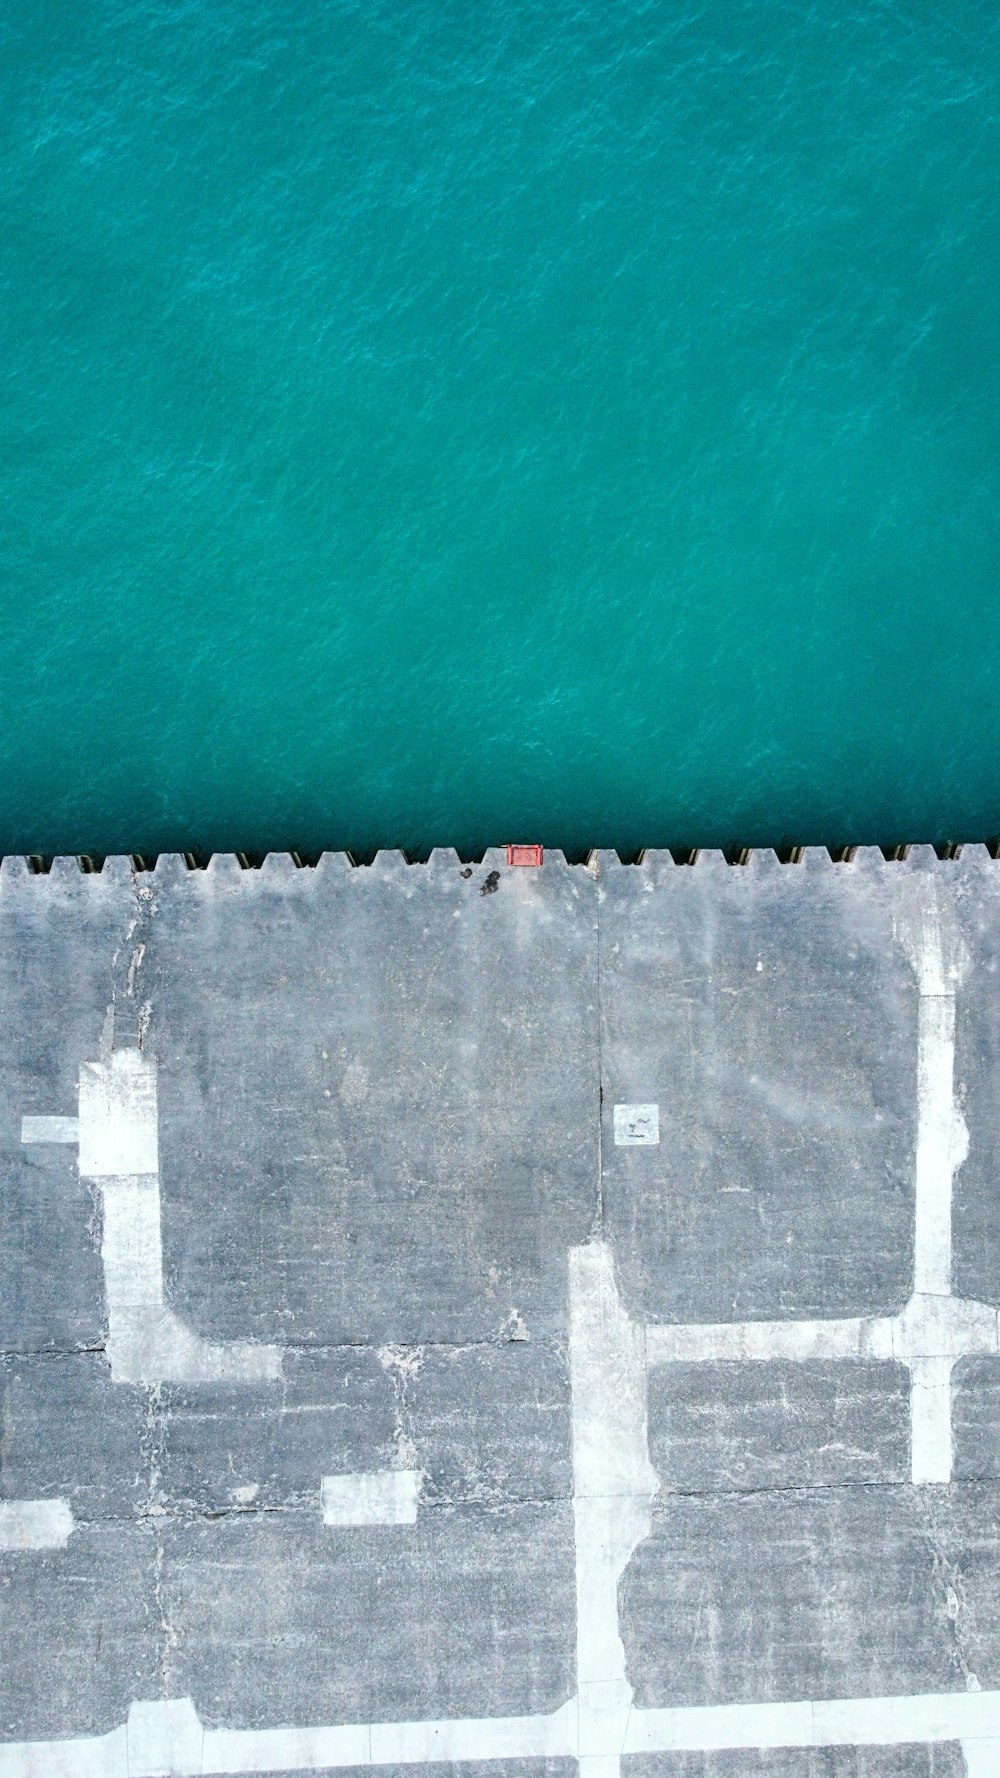 an aerial view of a concrete walkway next to a body of water